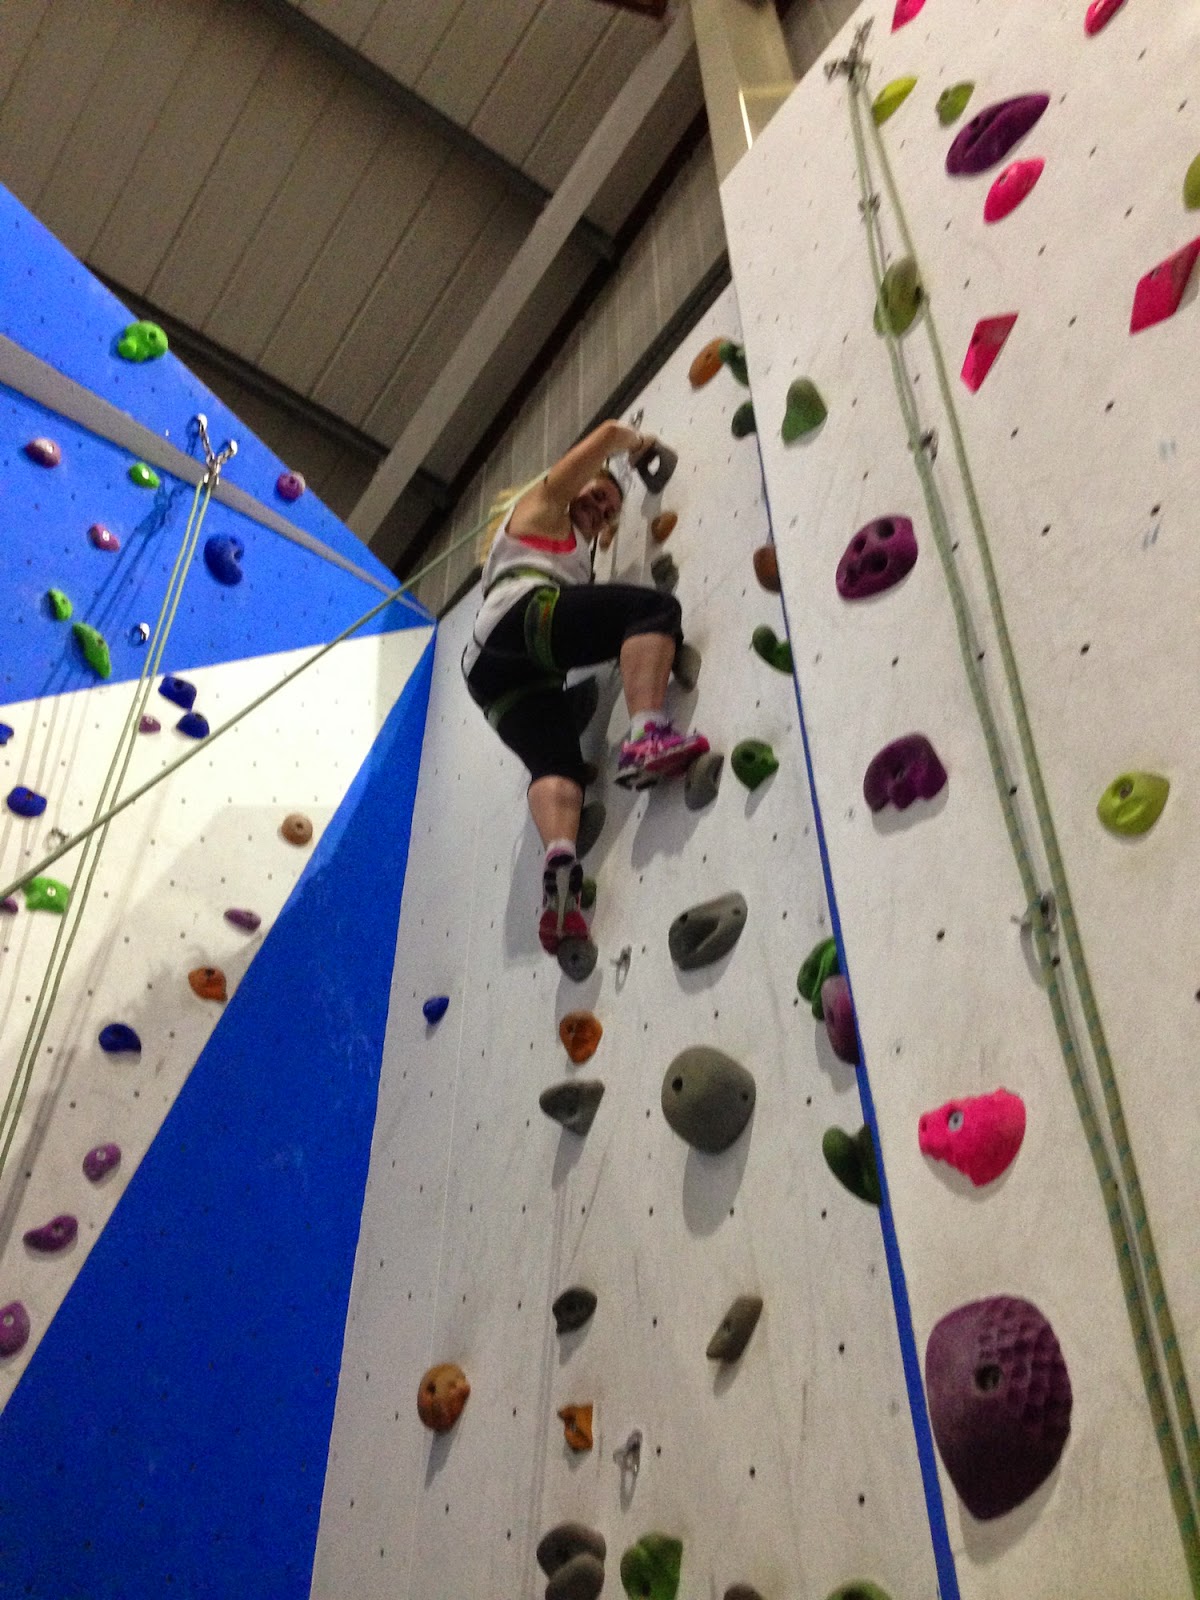 High Sports Climbing Beginner's Course at Withdean Sports Complex, Brighton